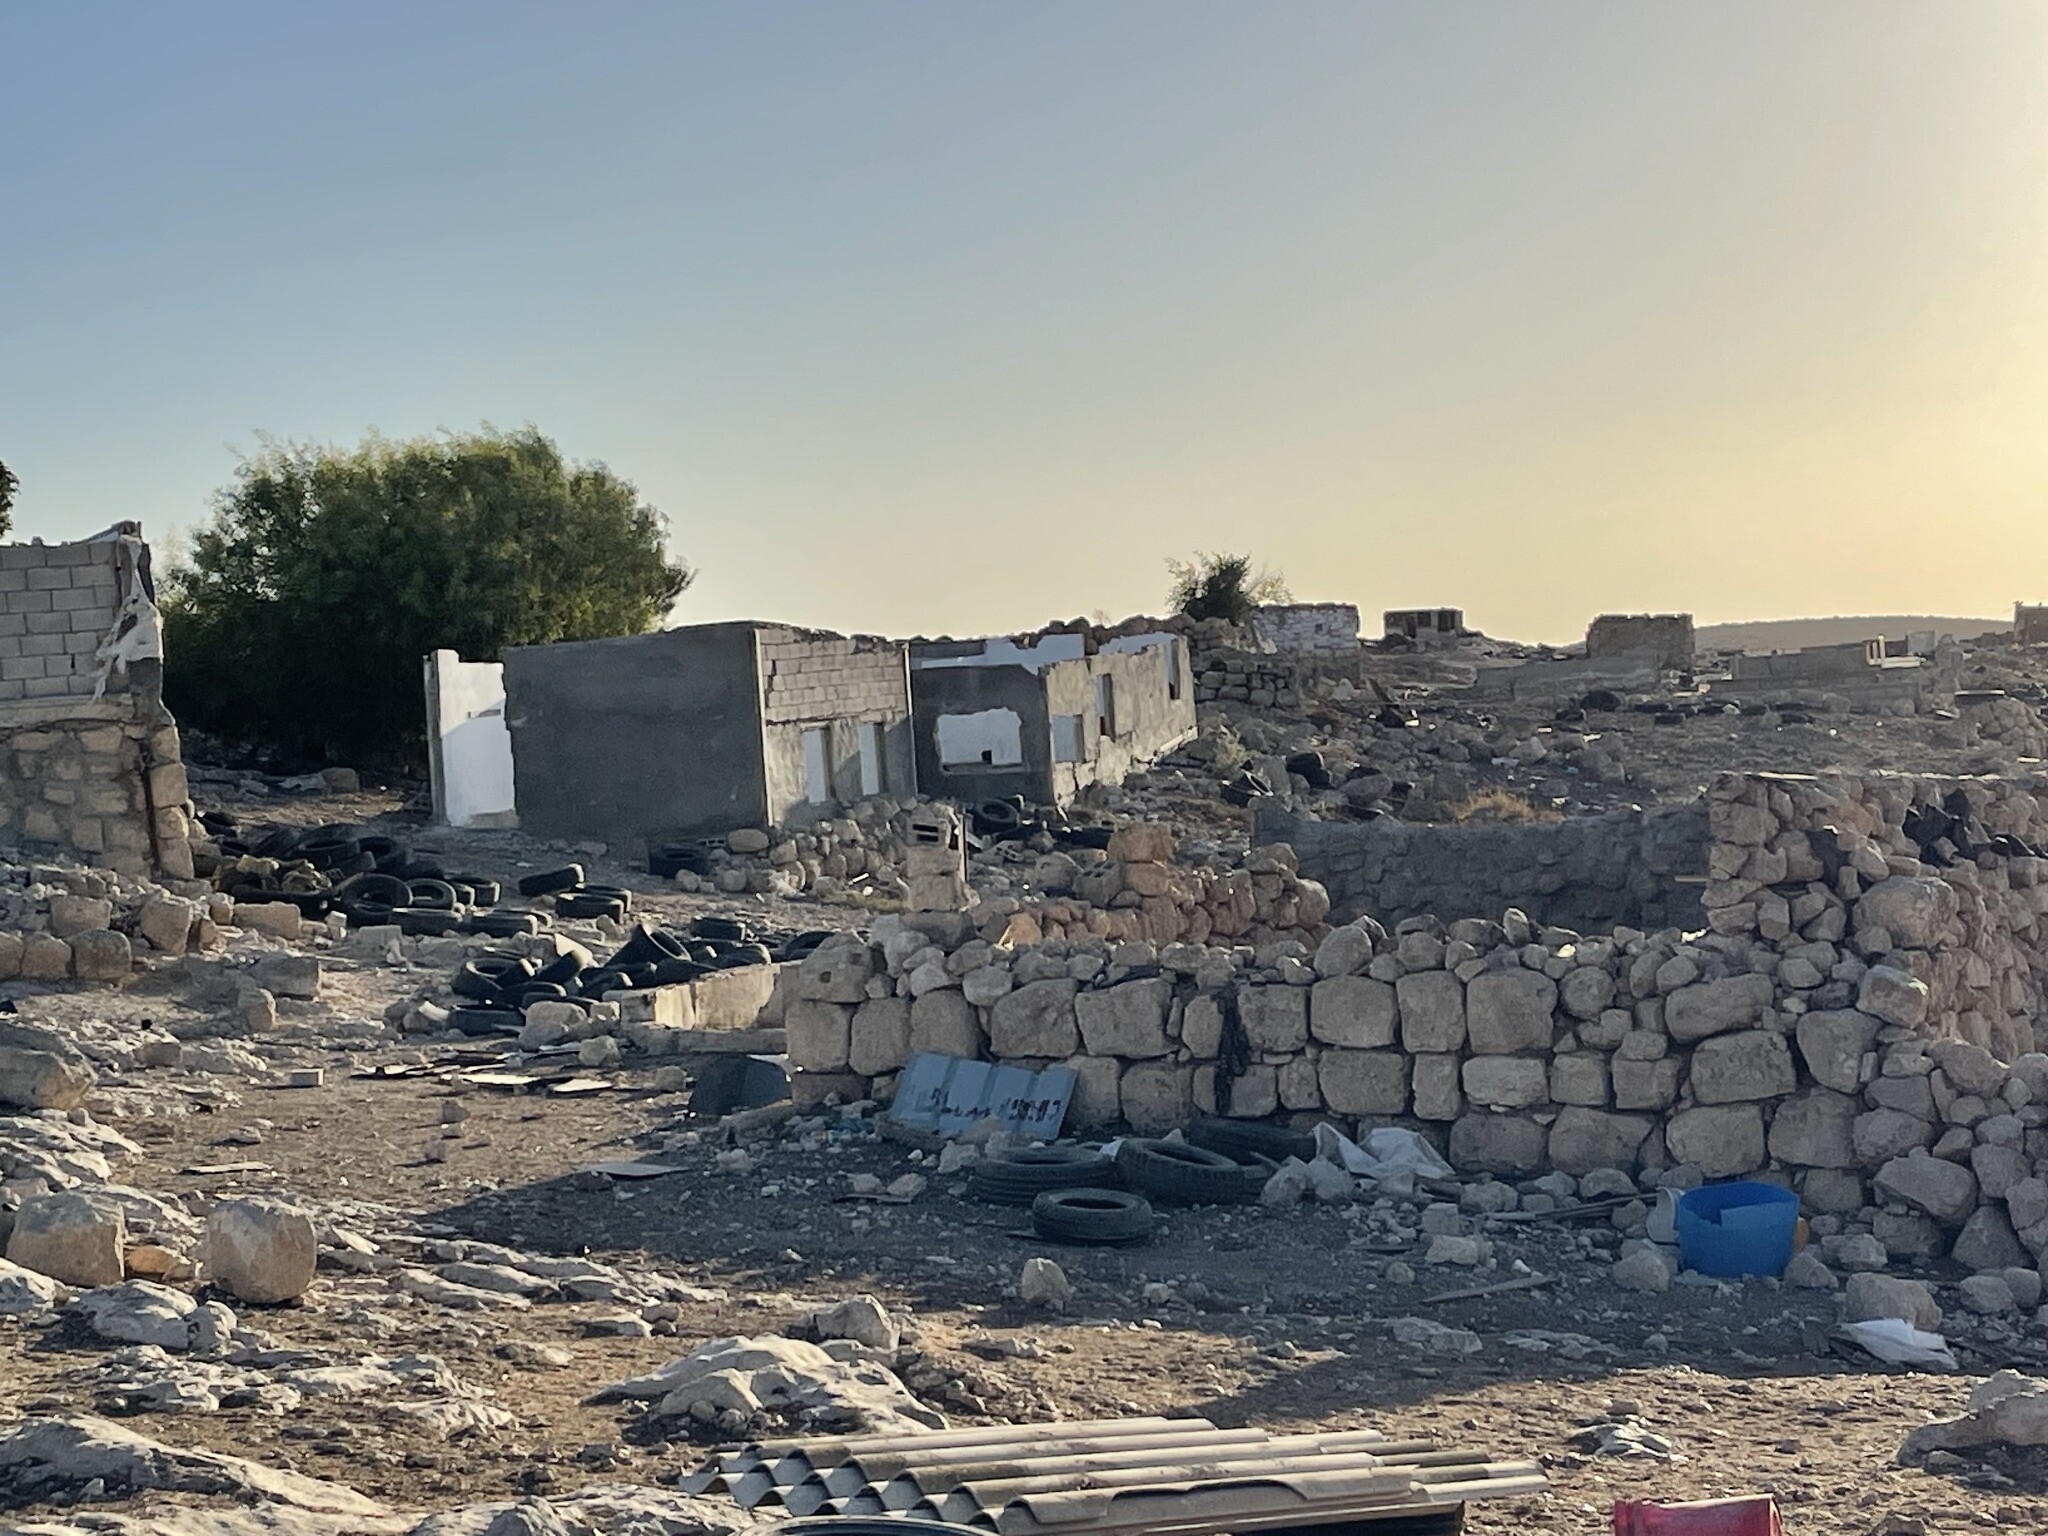 The abandoned Palestinian village of Zanutah in the South Hebron Hills in the West Bank. Zanuta was abandoned by its residents following a series of alleged attacks and incidents of harassment by extremist setters from the region. (Jeremy Sharon / Times of Israel)